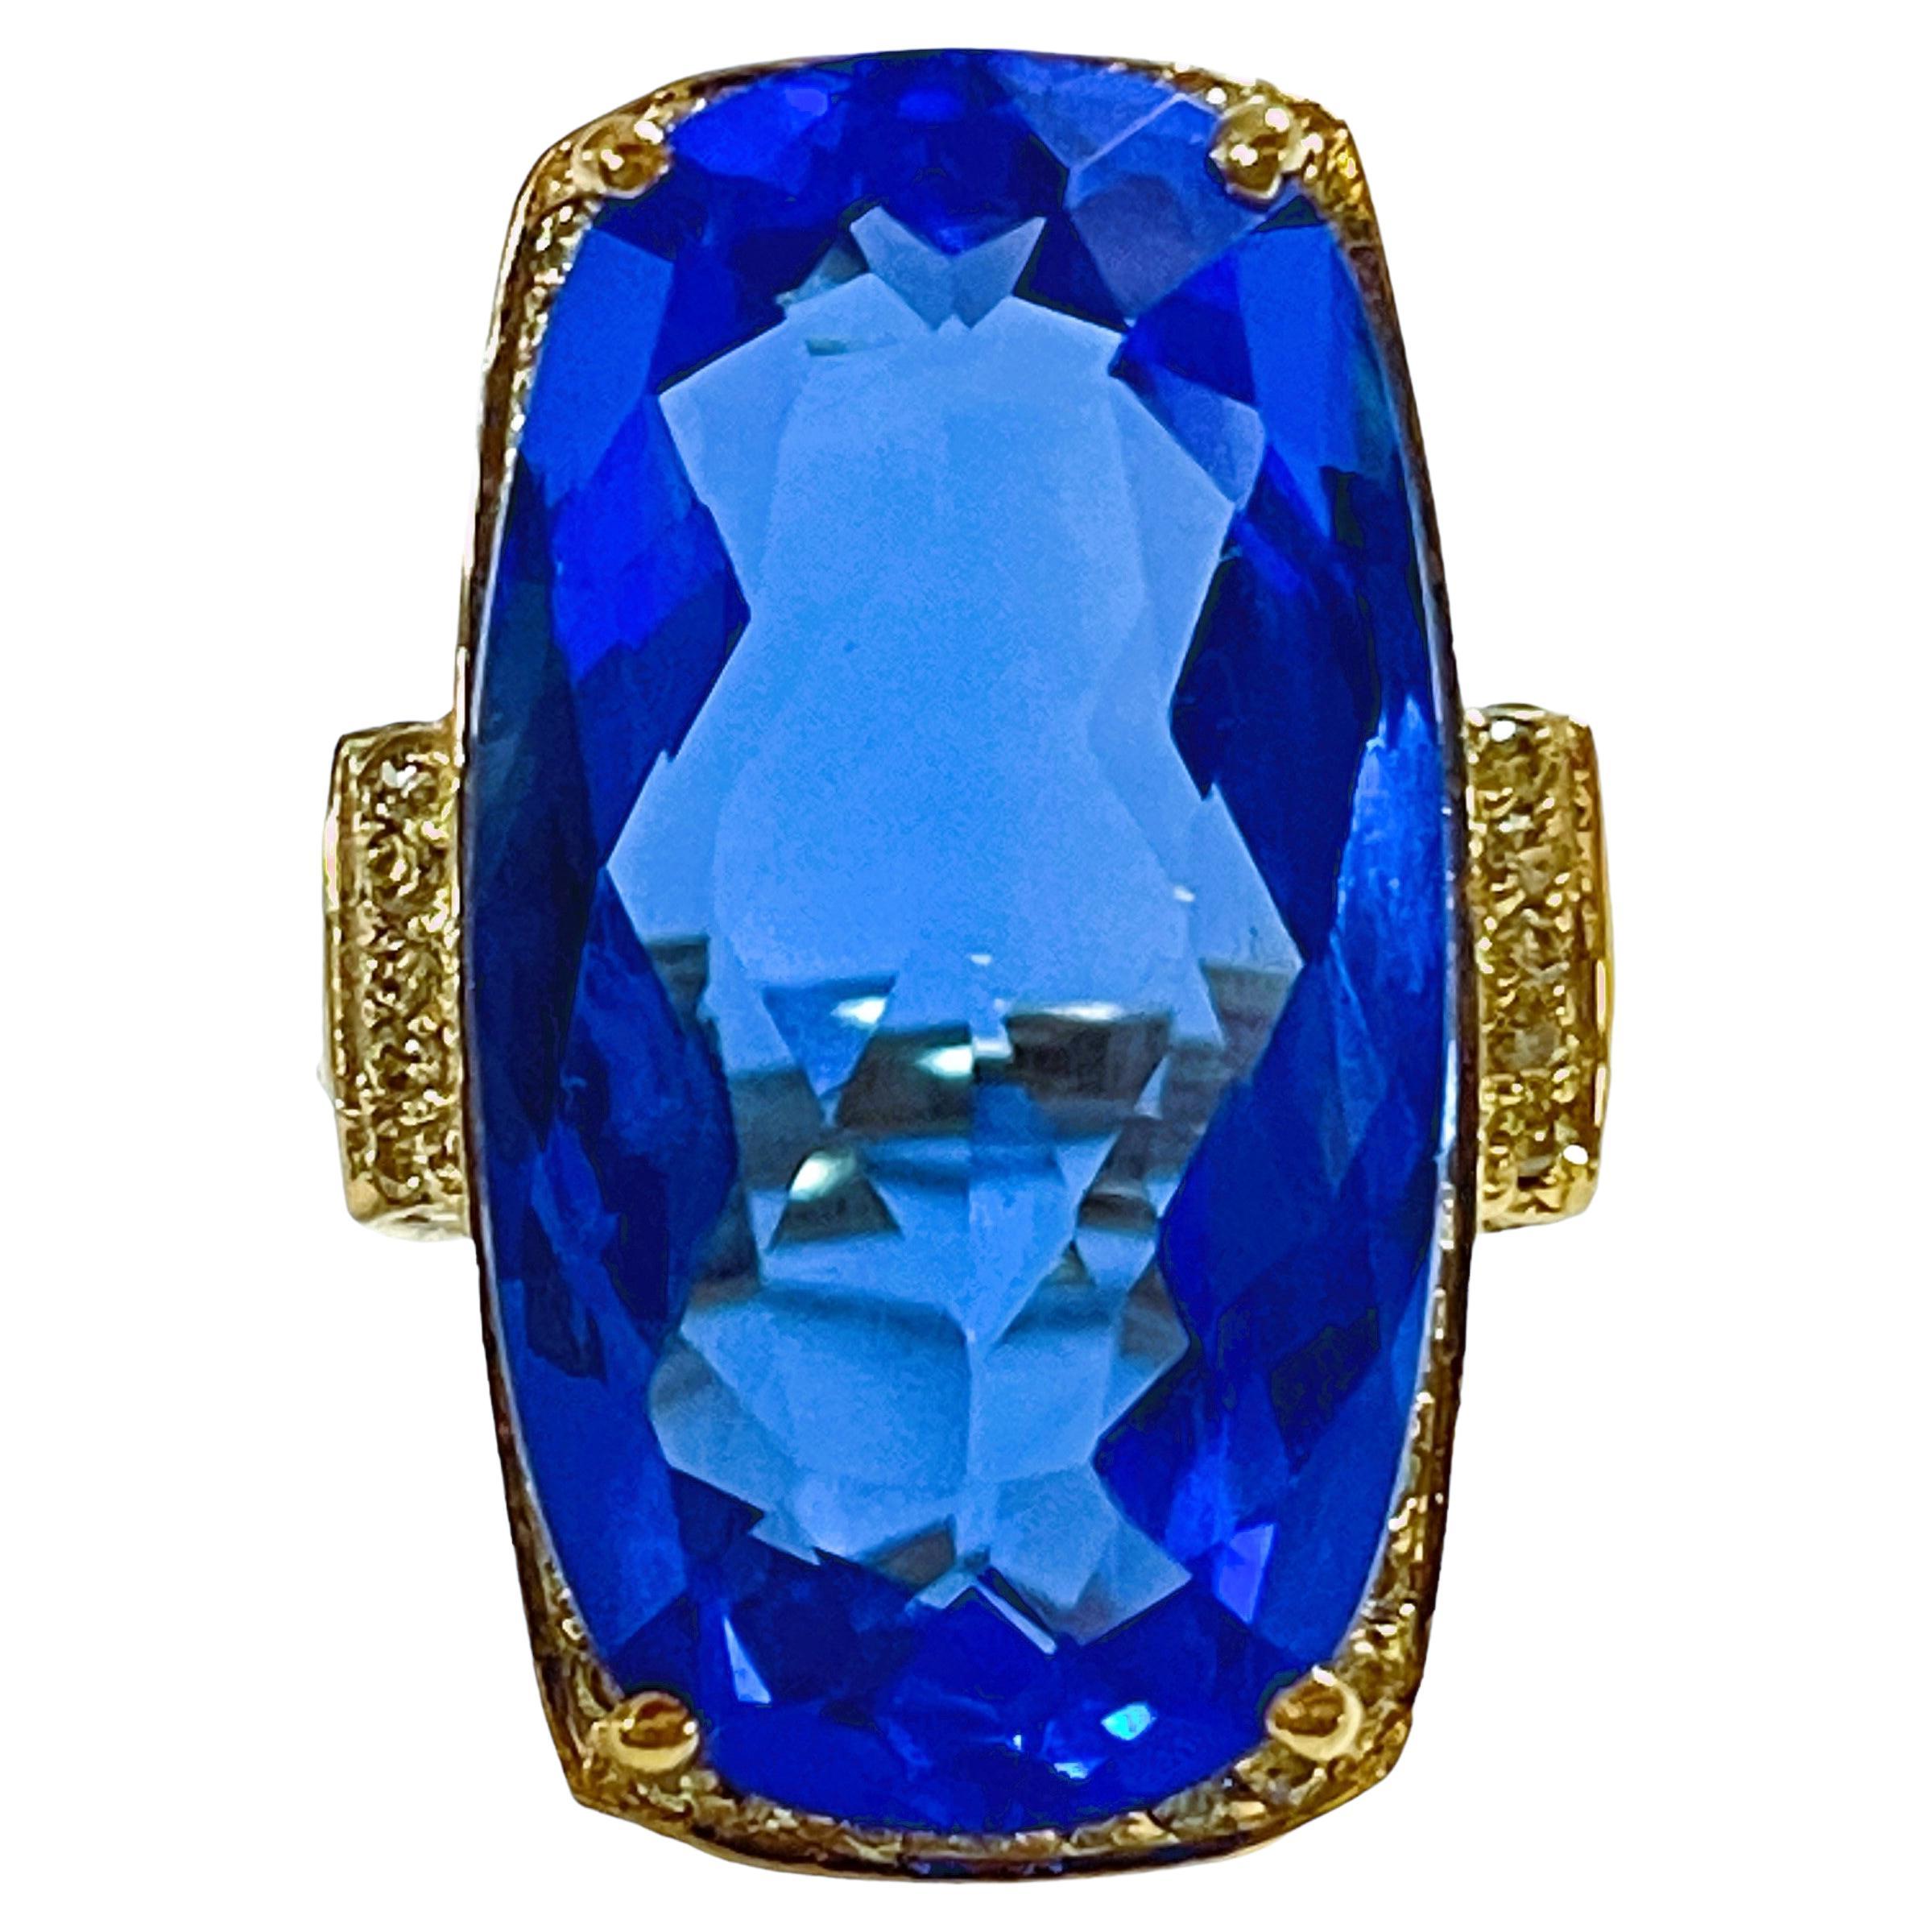 New 16.90 Carat Royal Blue Spinel & White Sapphire YGold Plated Sterling Ring